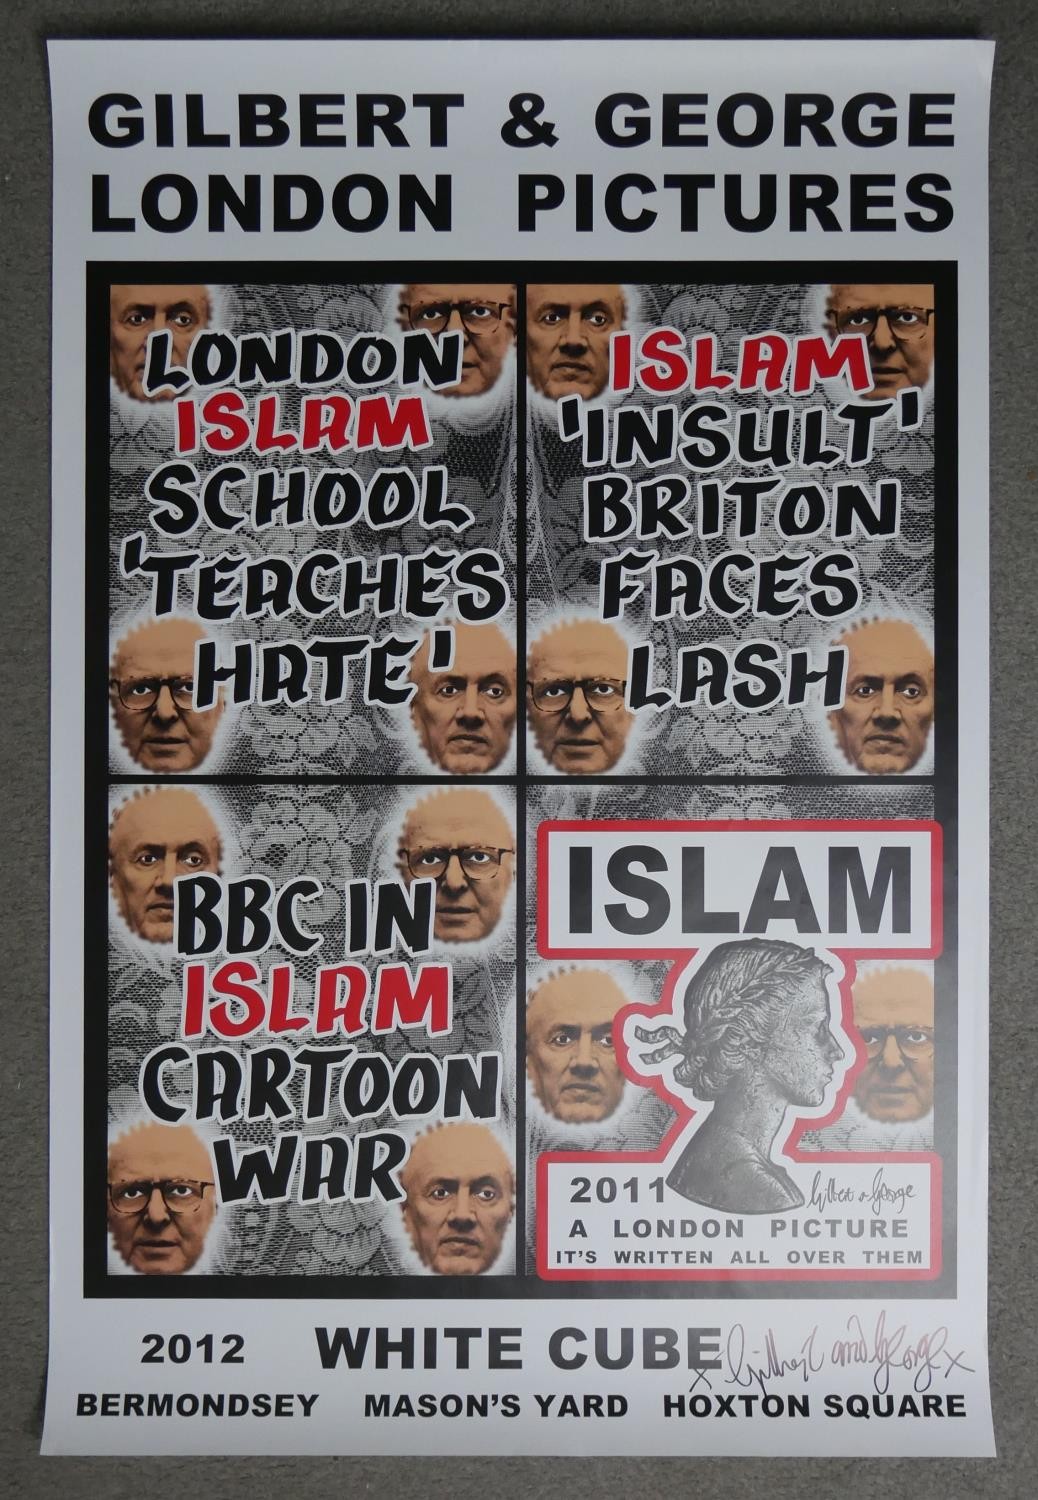 Gilbert & George, 20th century, White Cube, art exhibition poster for the artist show 'London